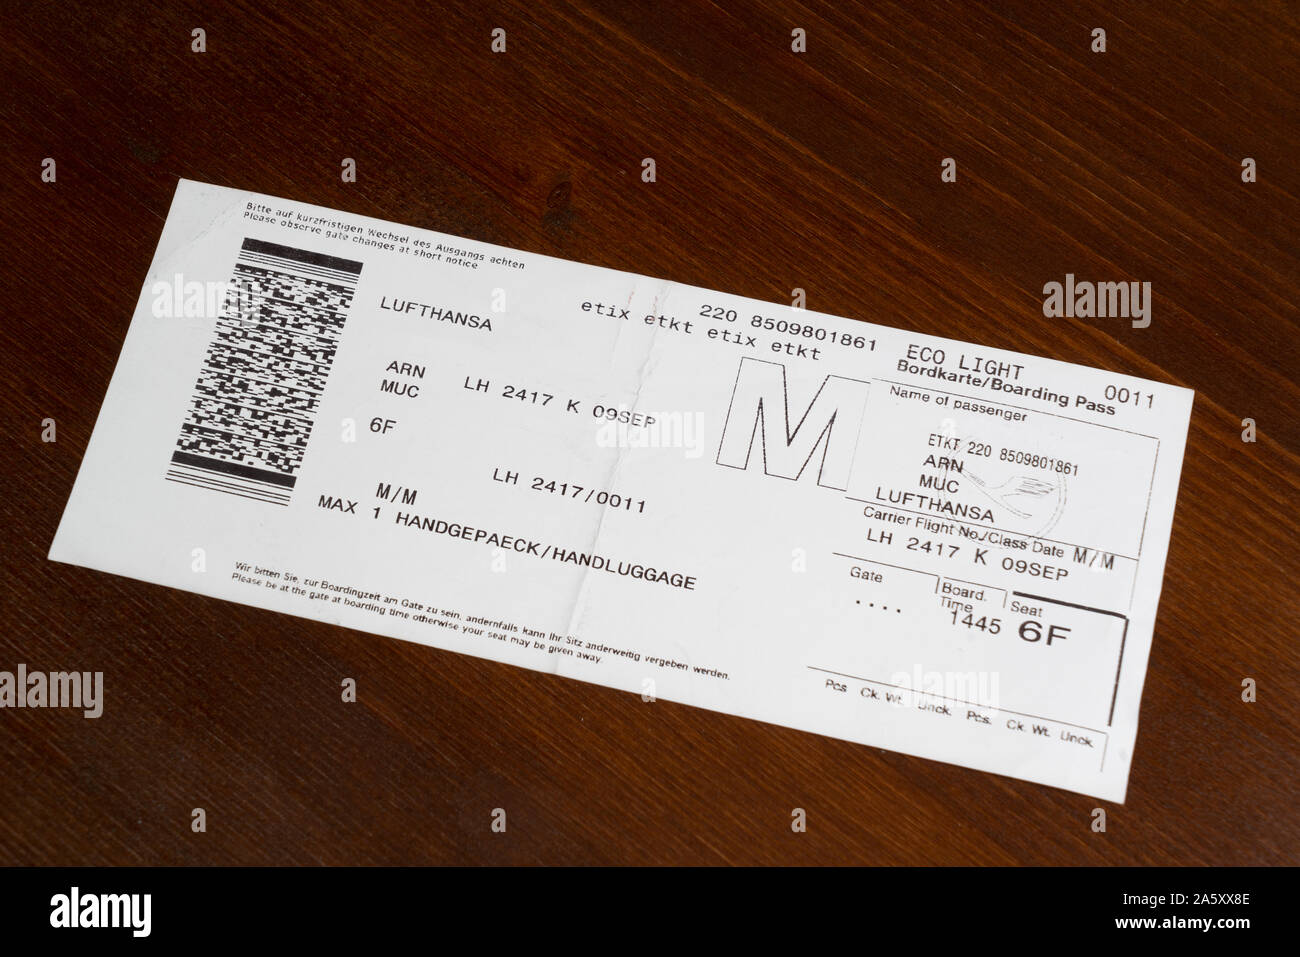 the boarding of the Lufthansa airline on a wooden table Photo